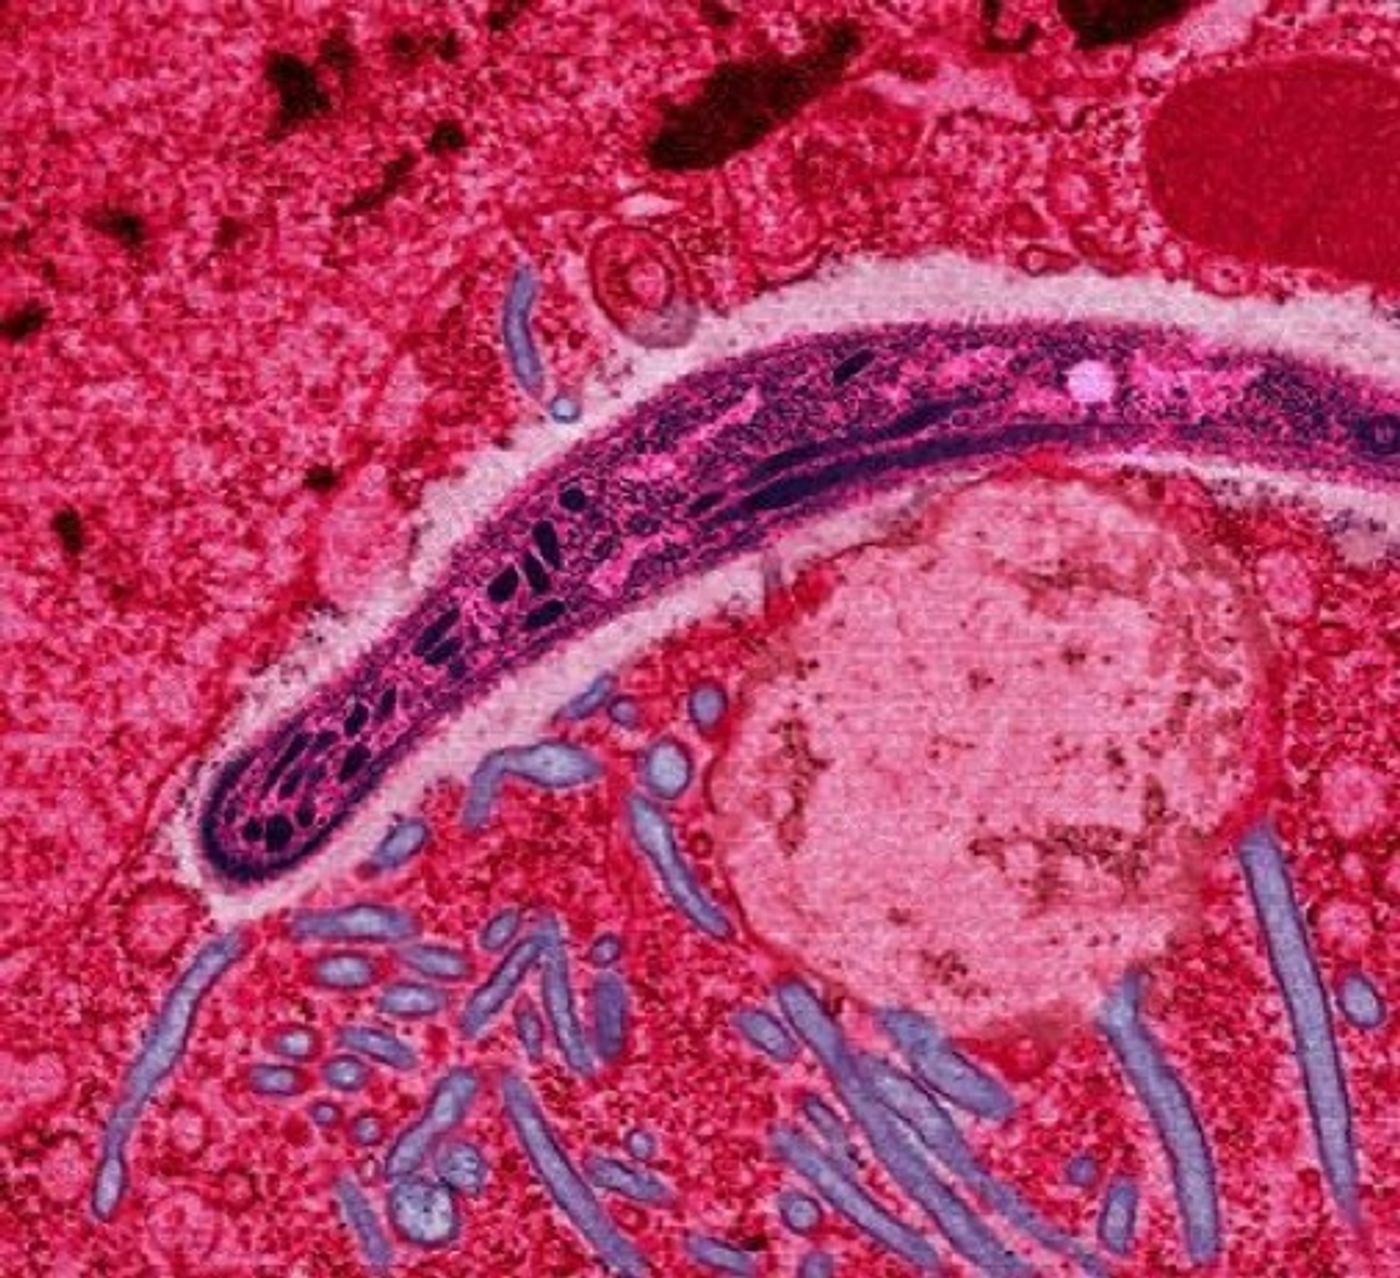 A Plasmodium from the saliva of a female mosquito moving across a mosquito cell / Credit: Wikipedia